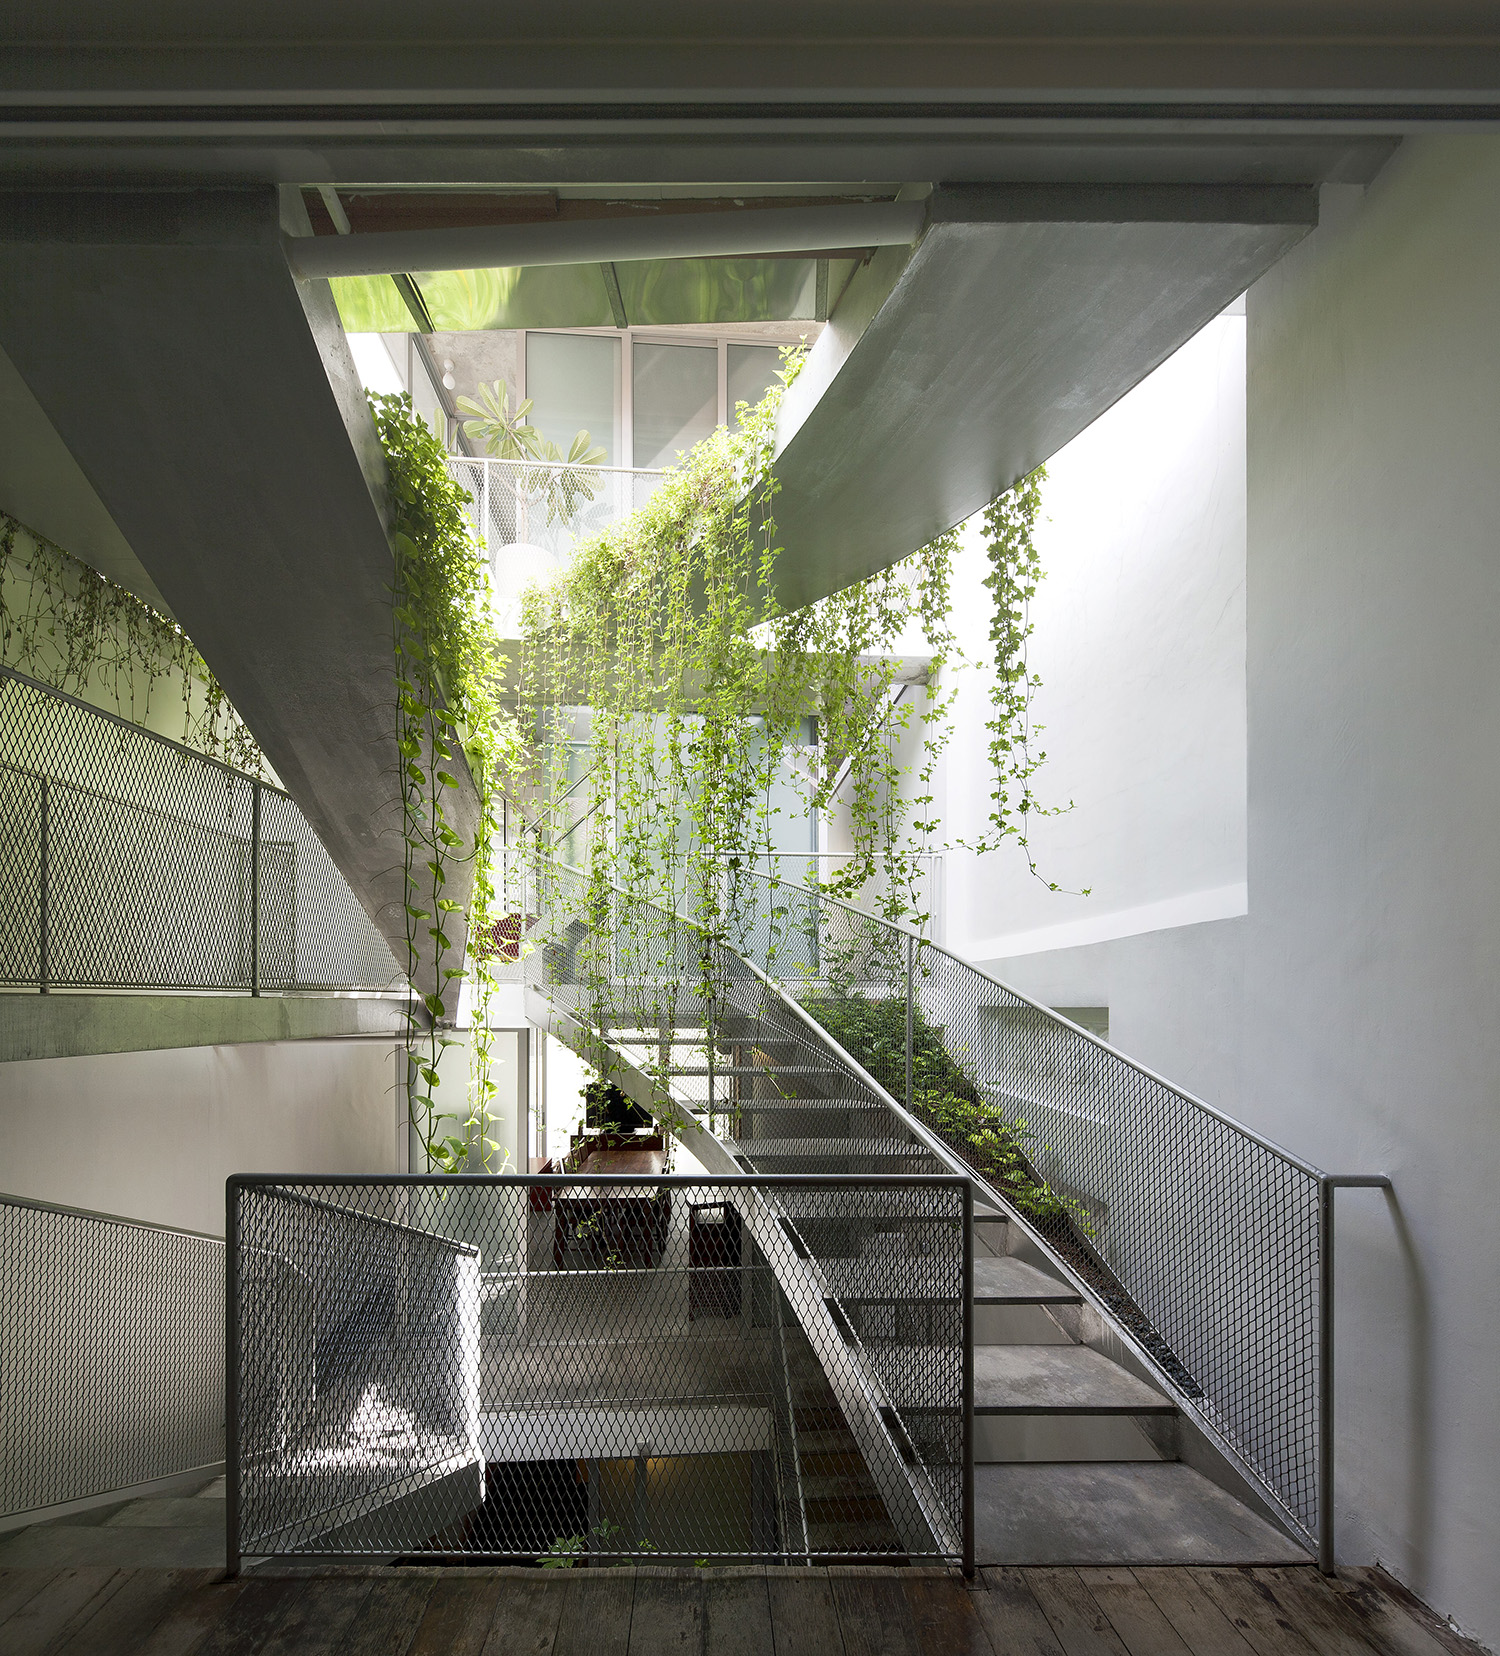 Unit 11 - central courtyard open to the sky, mesh stairs with overhanging creepers 